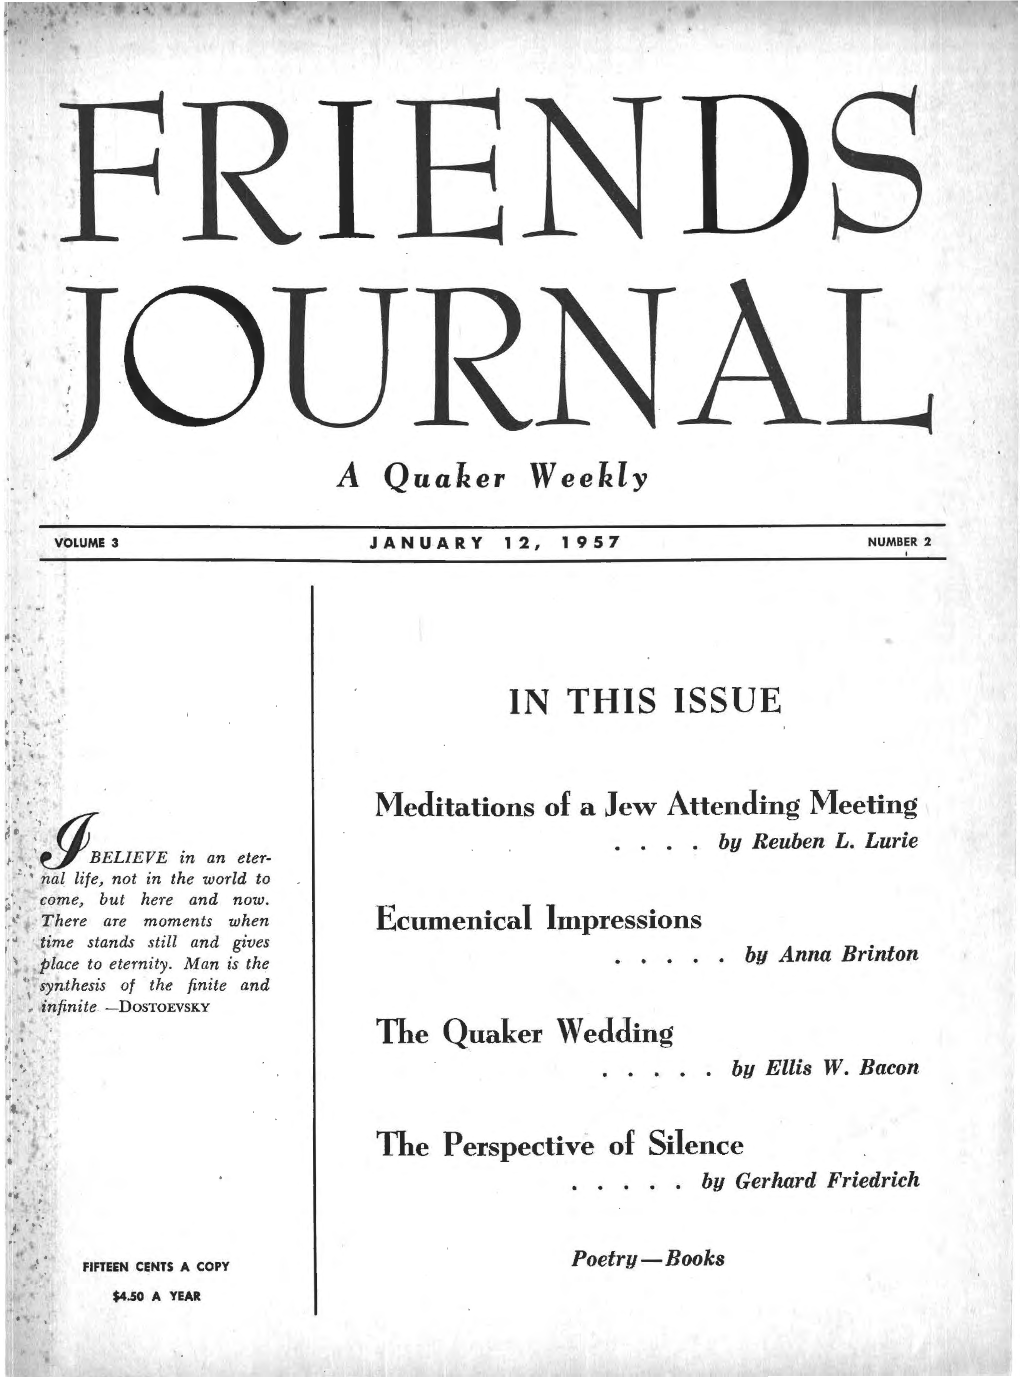 Archived Issue of Friends Journal